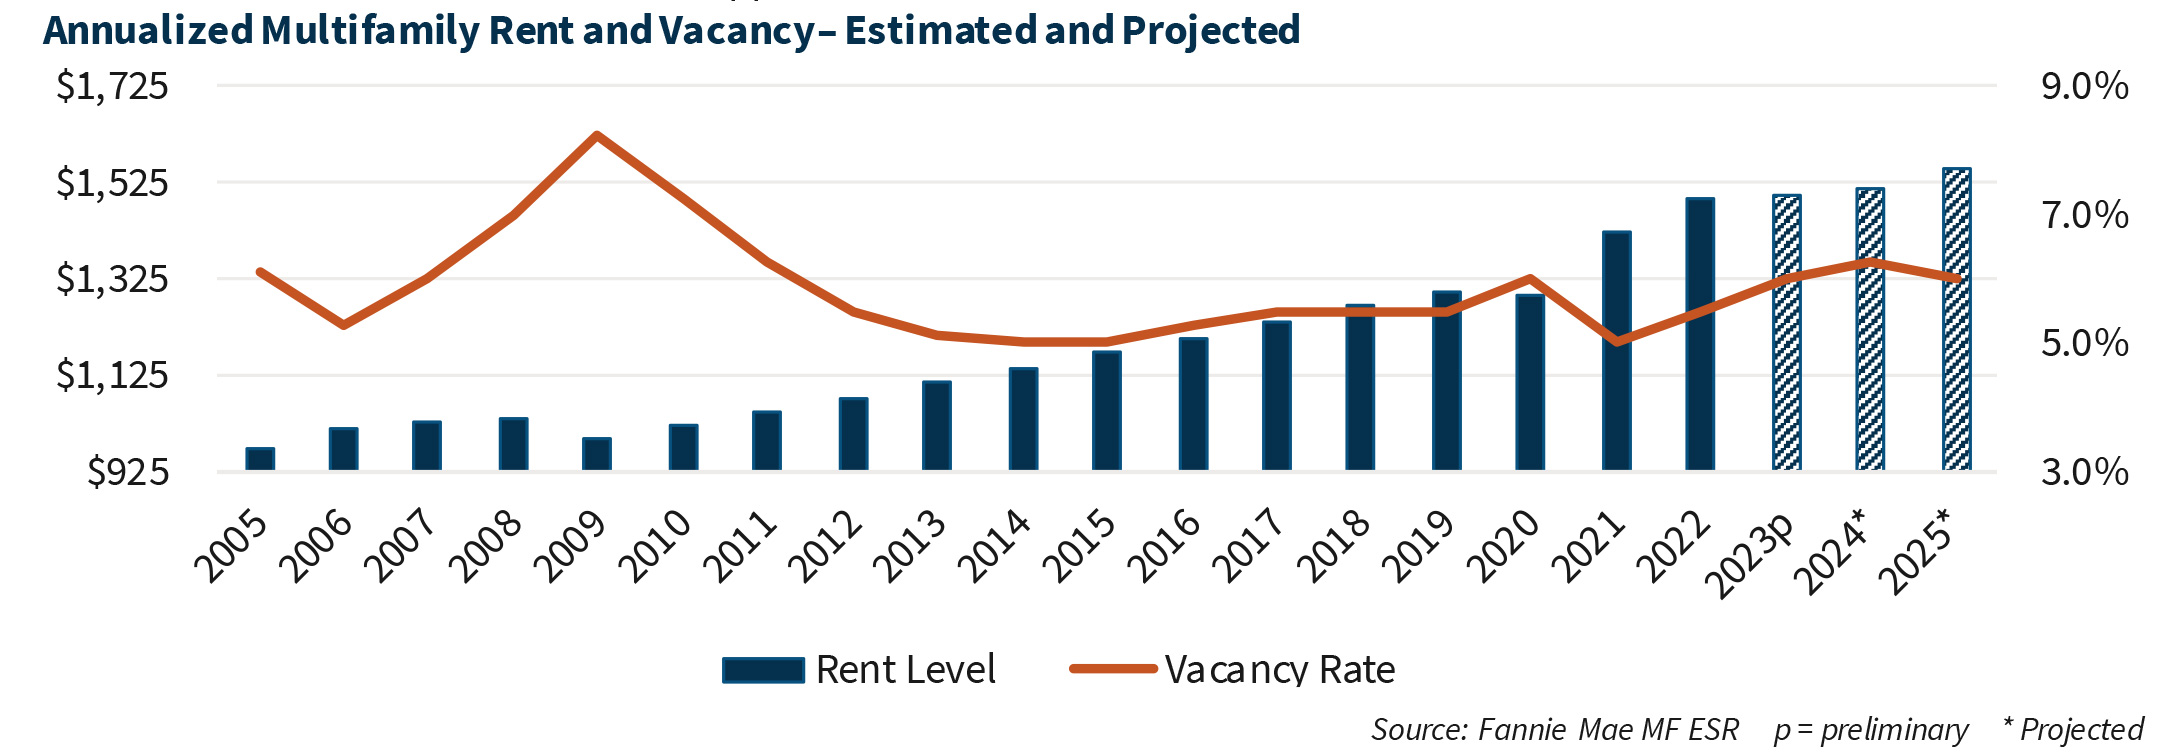 Annualized Multifamily Rent and Vacancy – Estimated and Projected